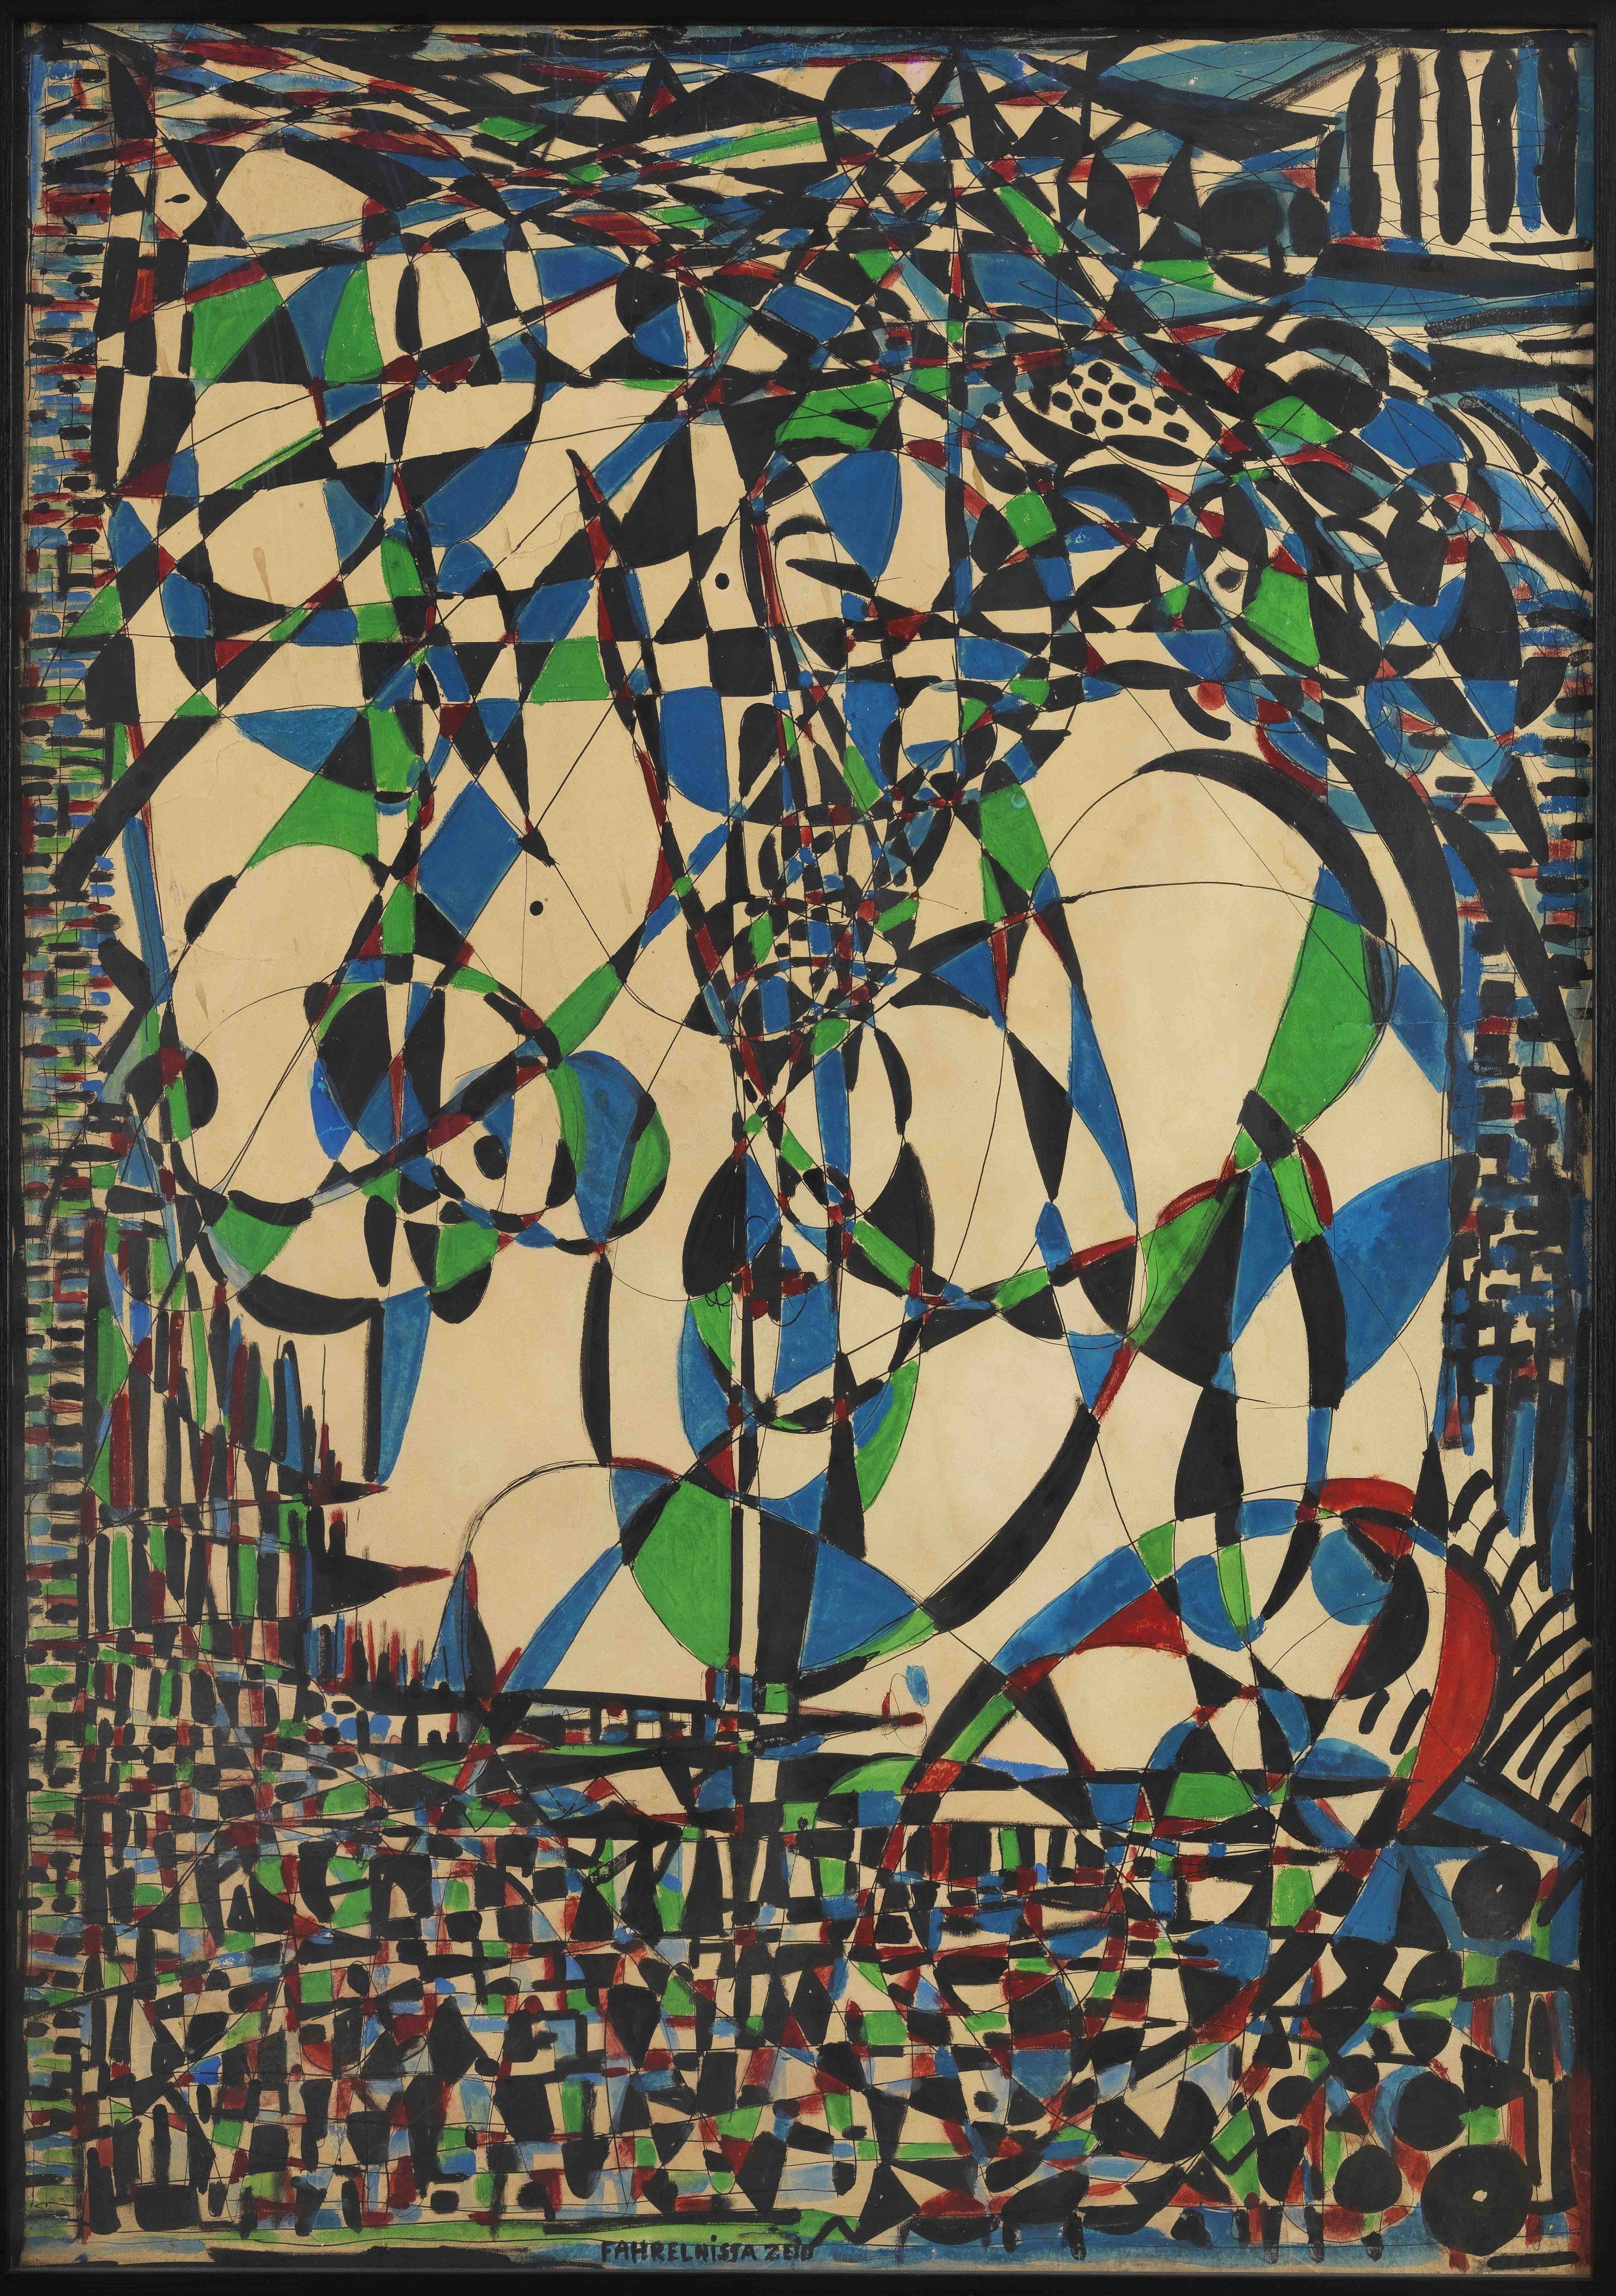 Fahrelnissa Zeid,1950’s, 'Abstract Composition,' mixed technique on paper, 104 by 74 centimeters. (Courtesy of Alan) 